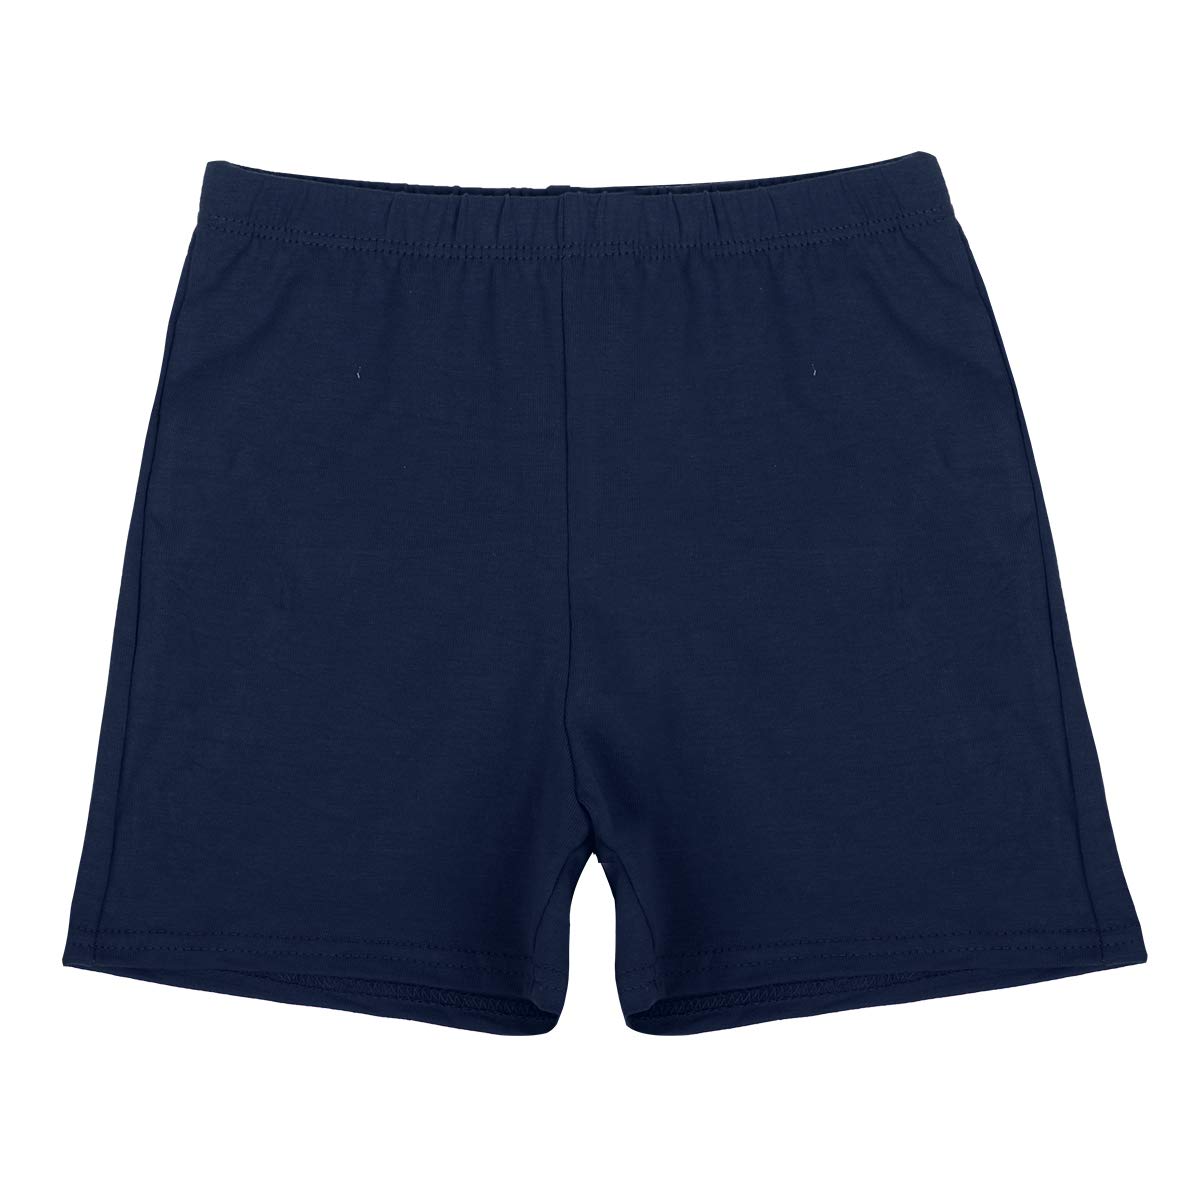 Girls' Navy PE Shorts, 2-pack, Stretch Jersey, Elasticated Waist, 4-5 Y